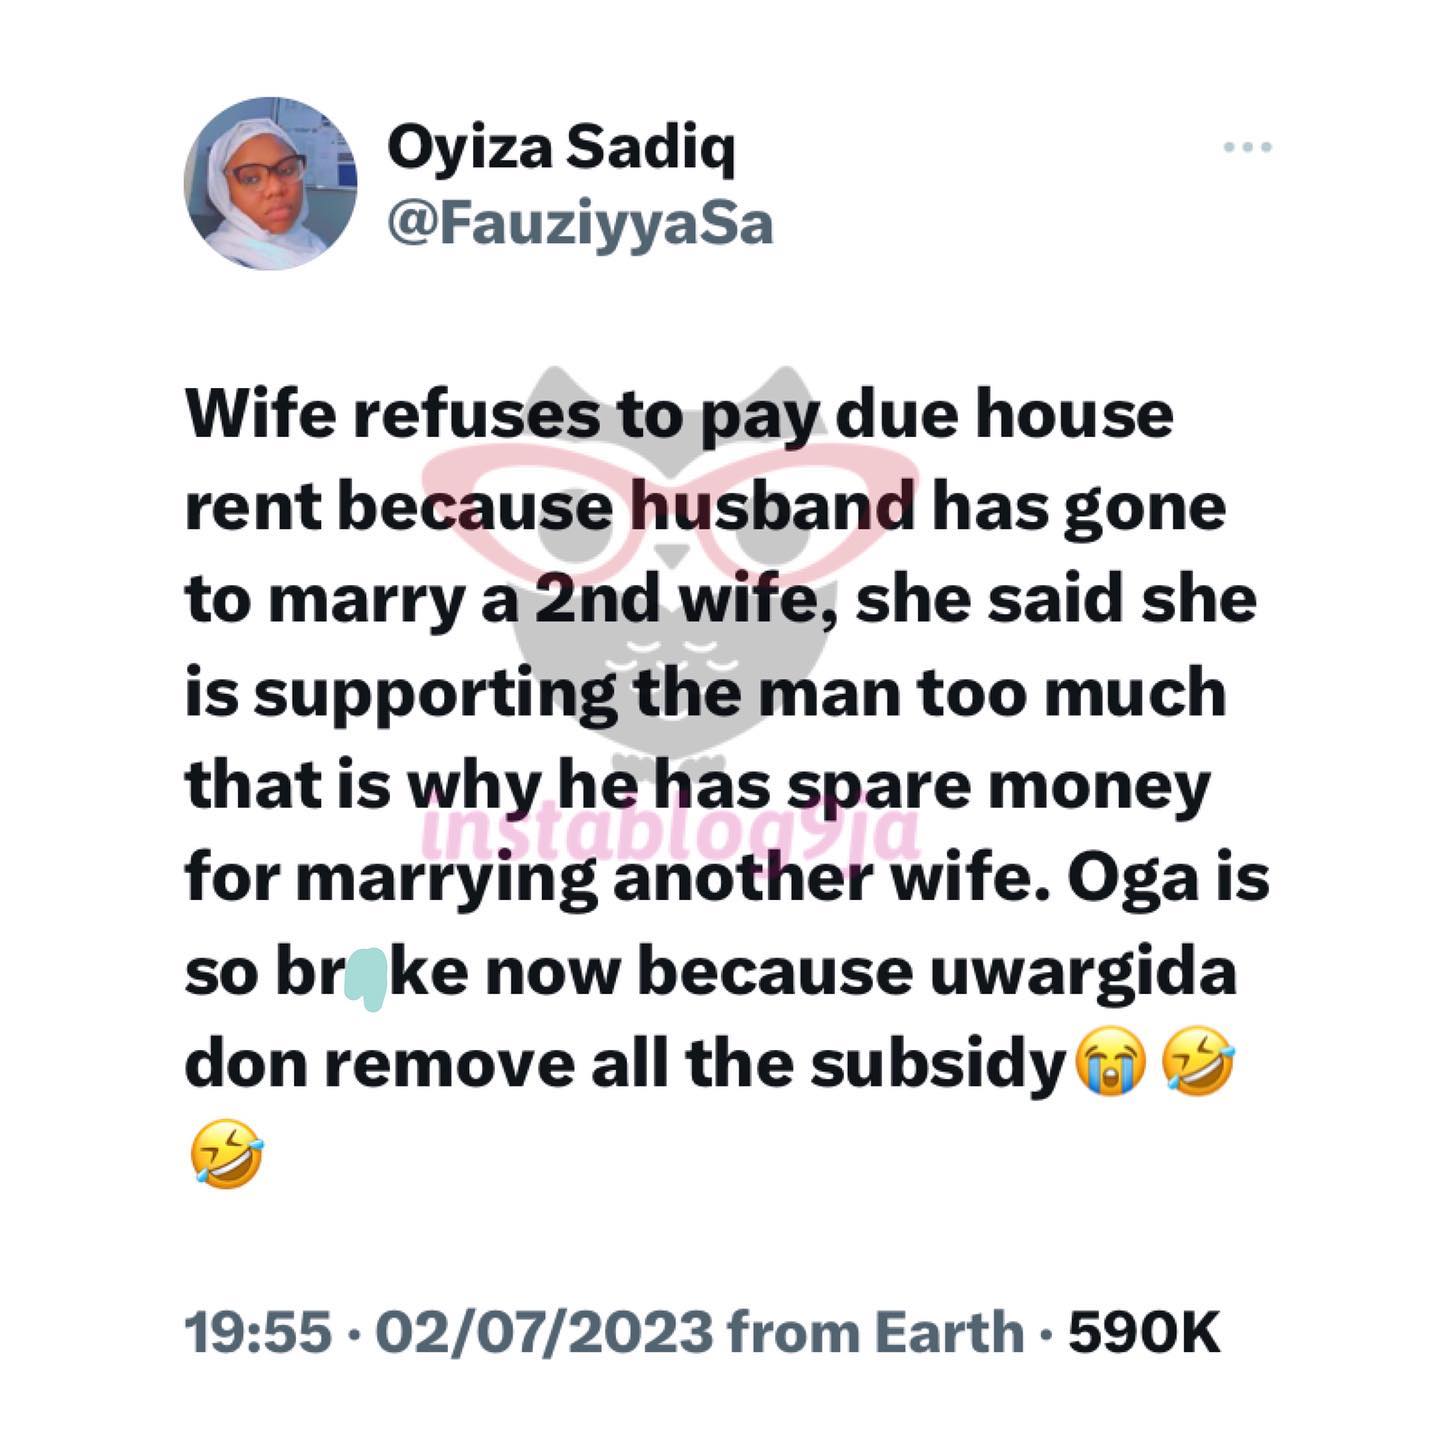 Man Reportedly Goes Broke After Marrying A Second Wife